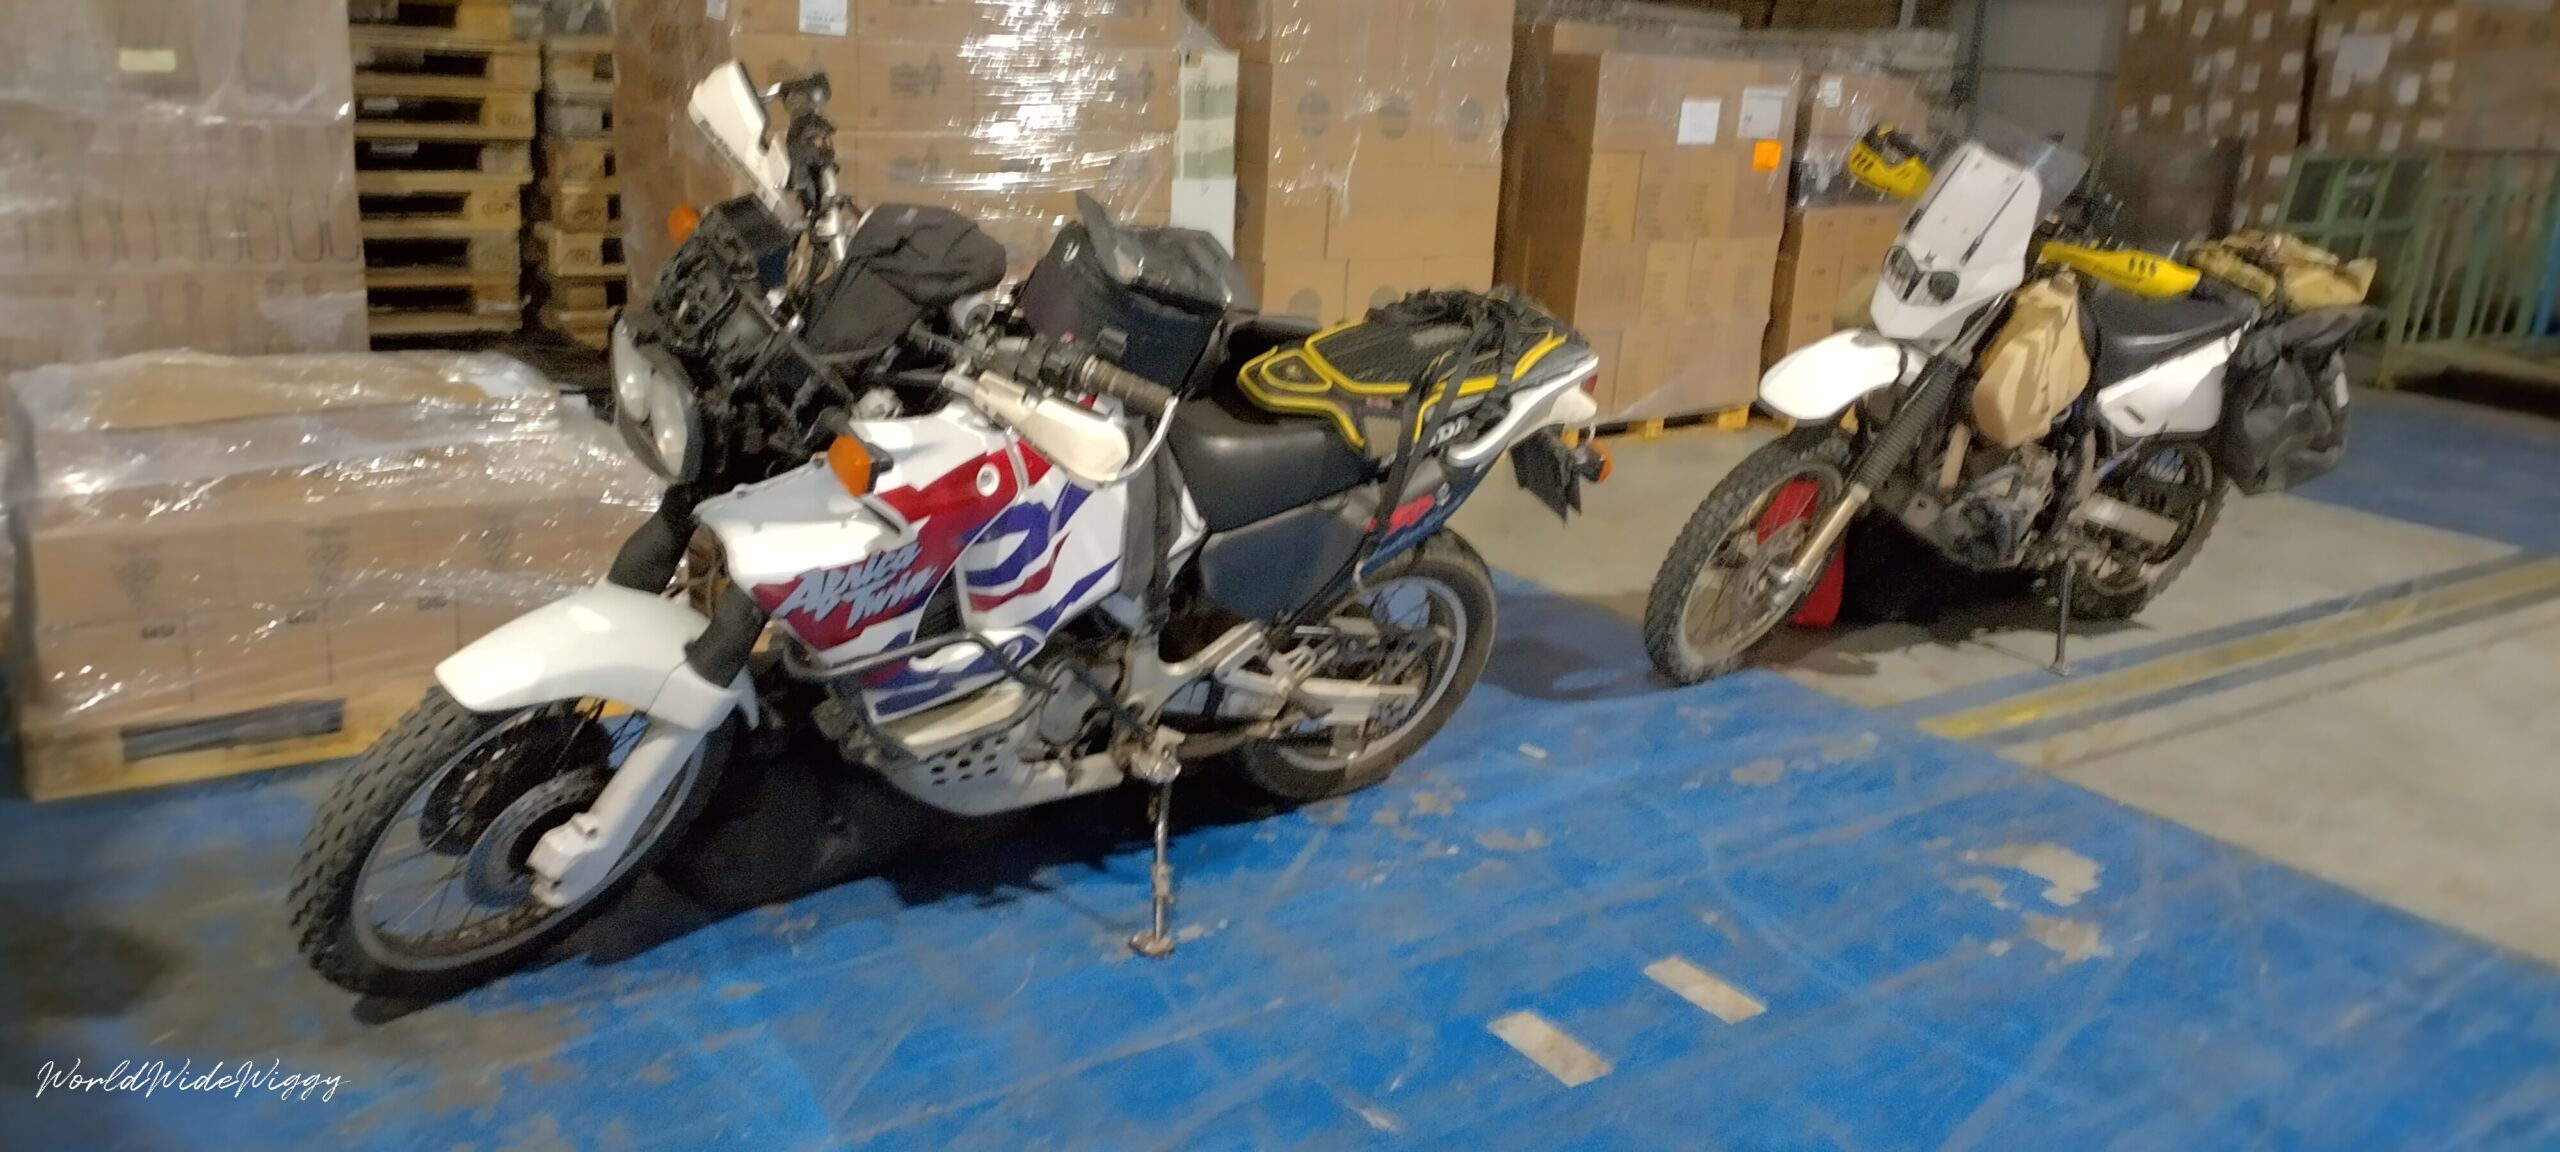 Dropping Bikes Off At Shipping Agents